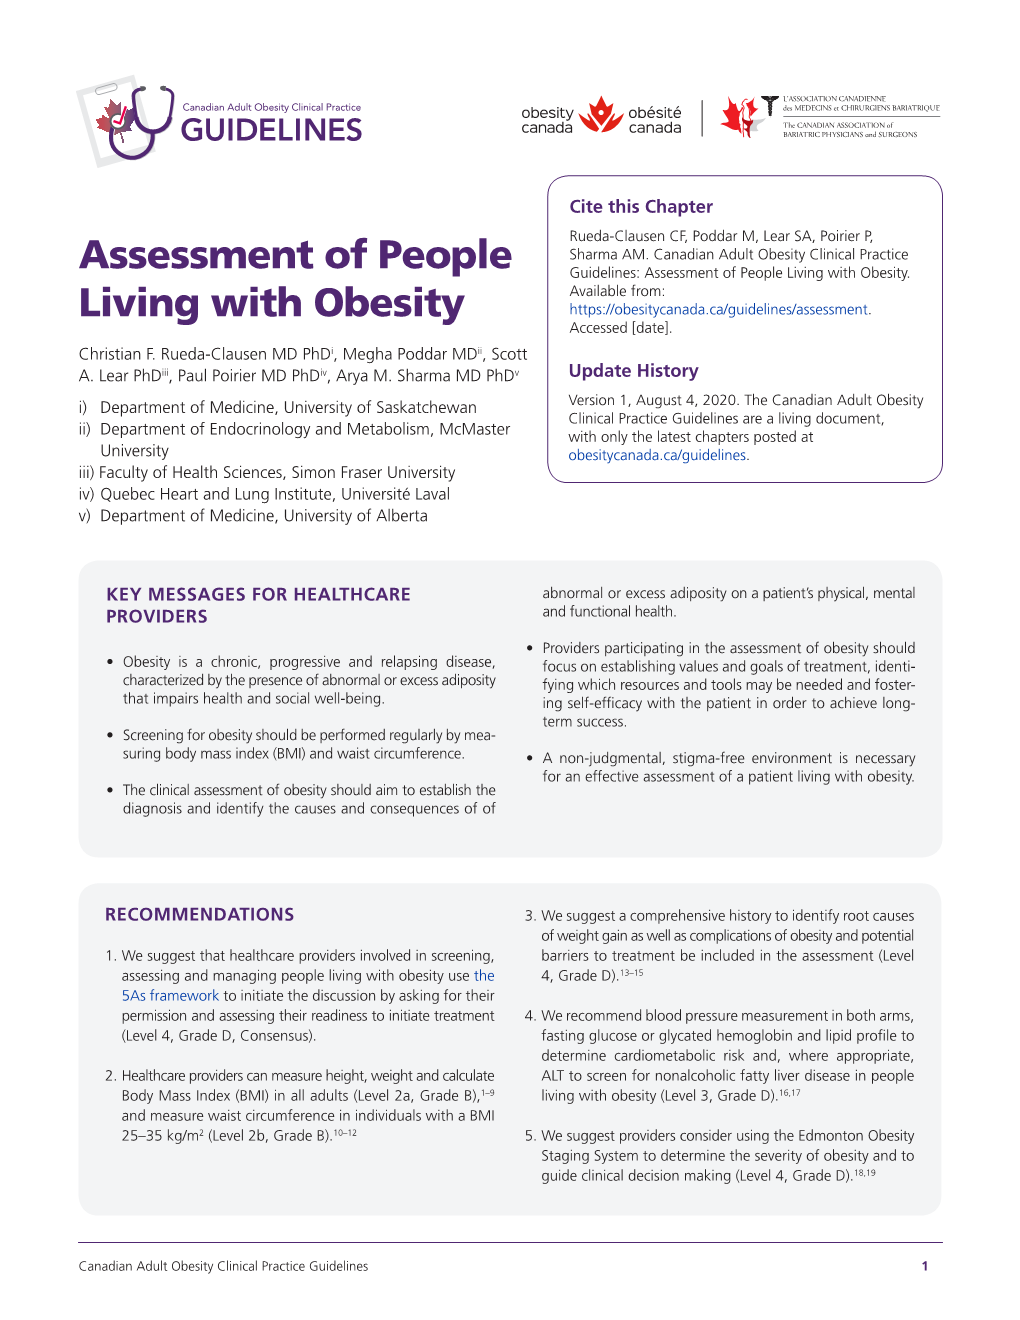 Assessment of People Living with Obesity